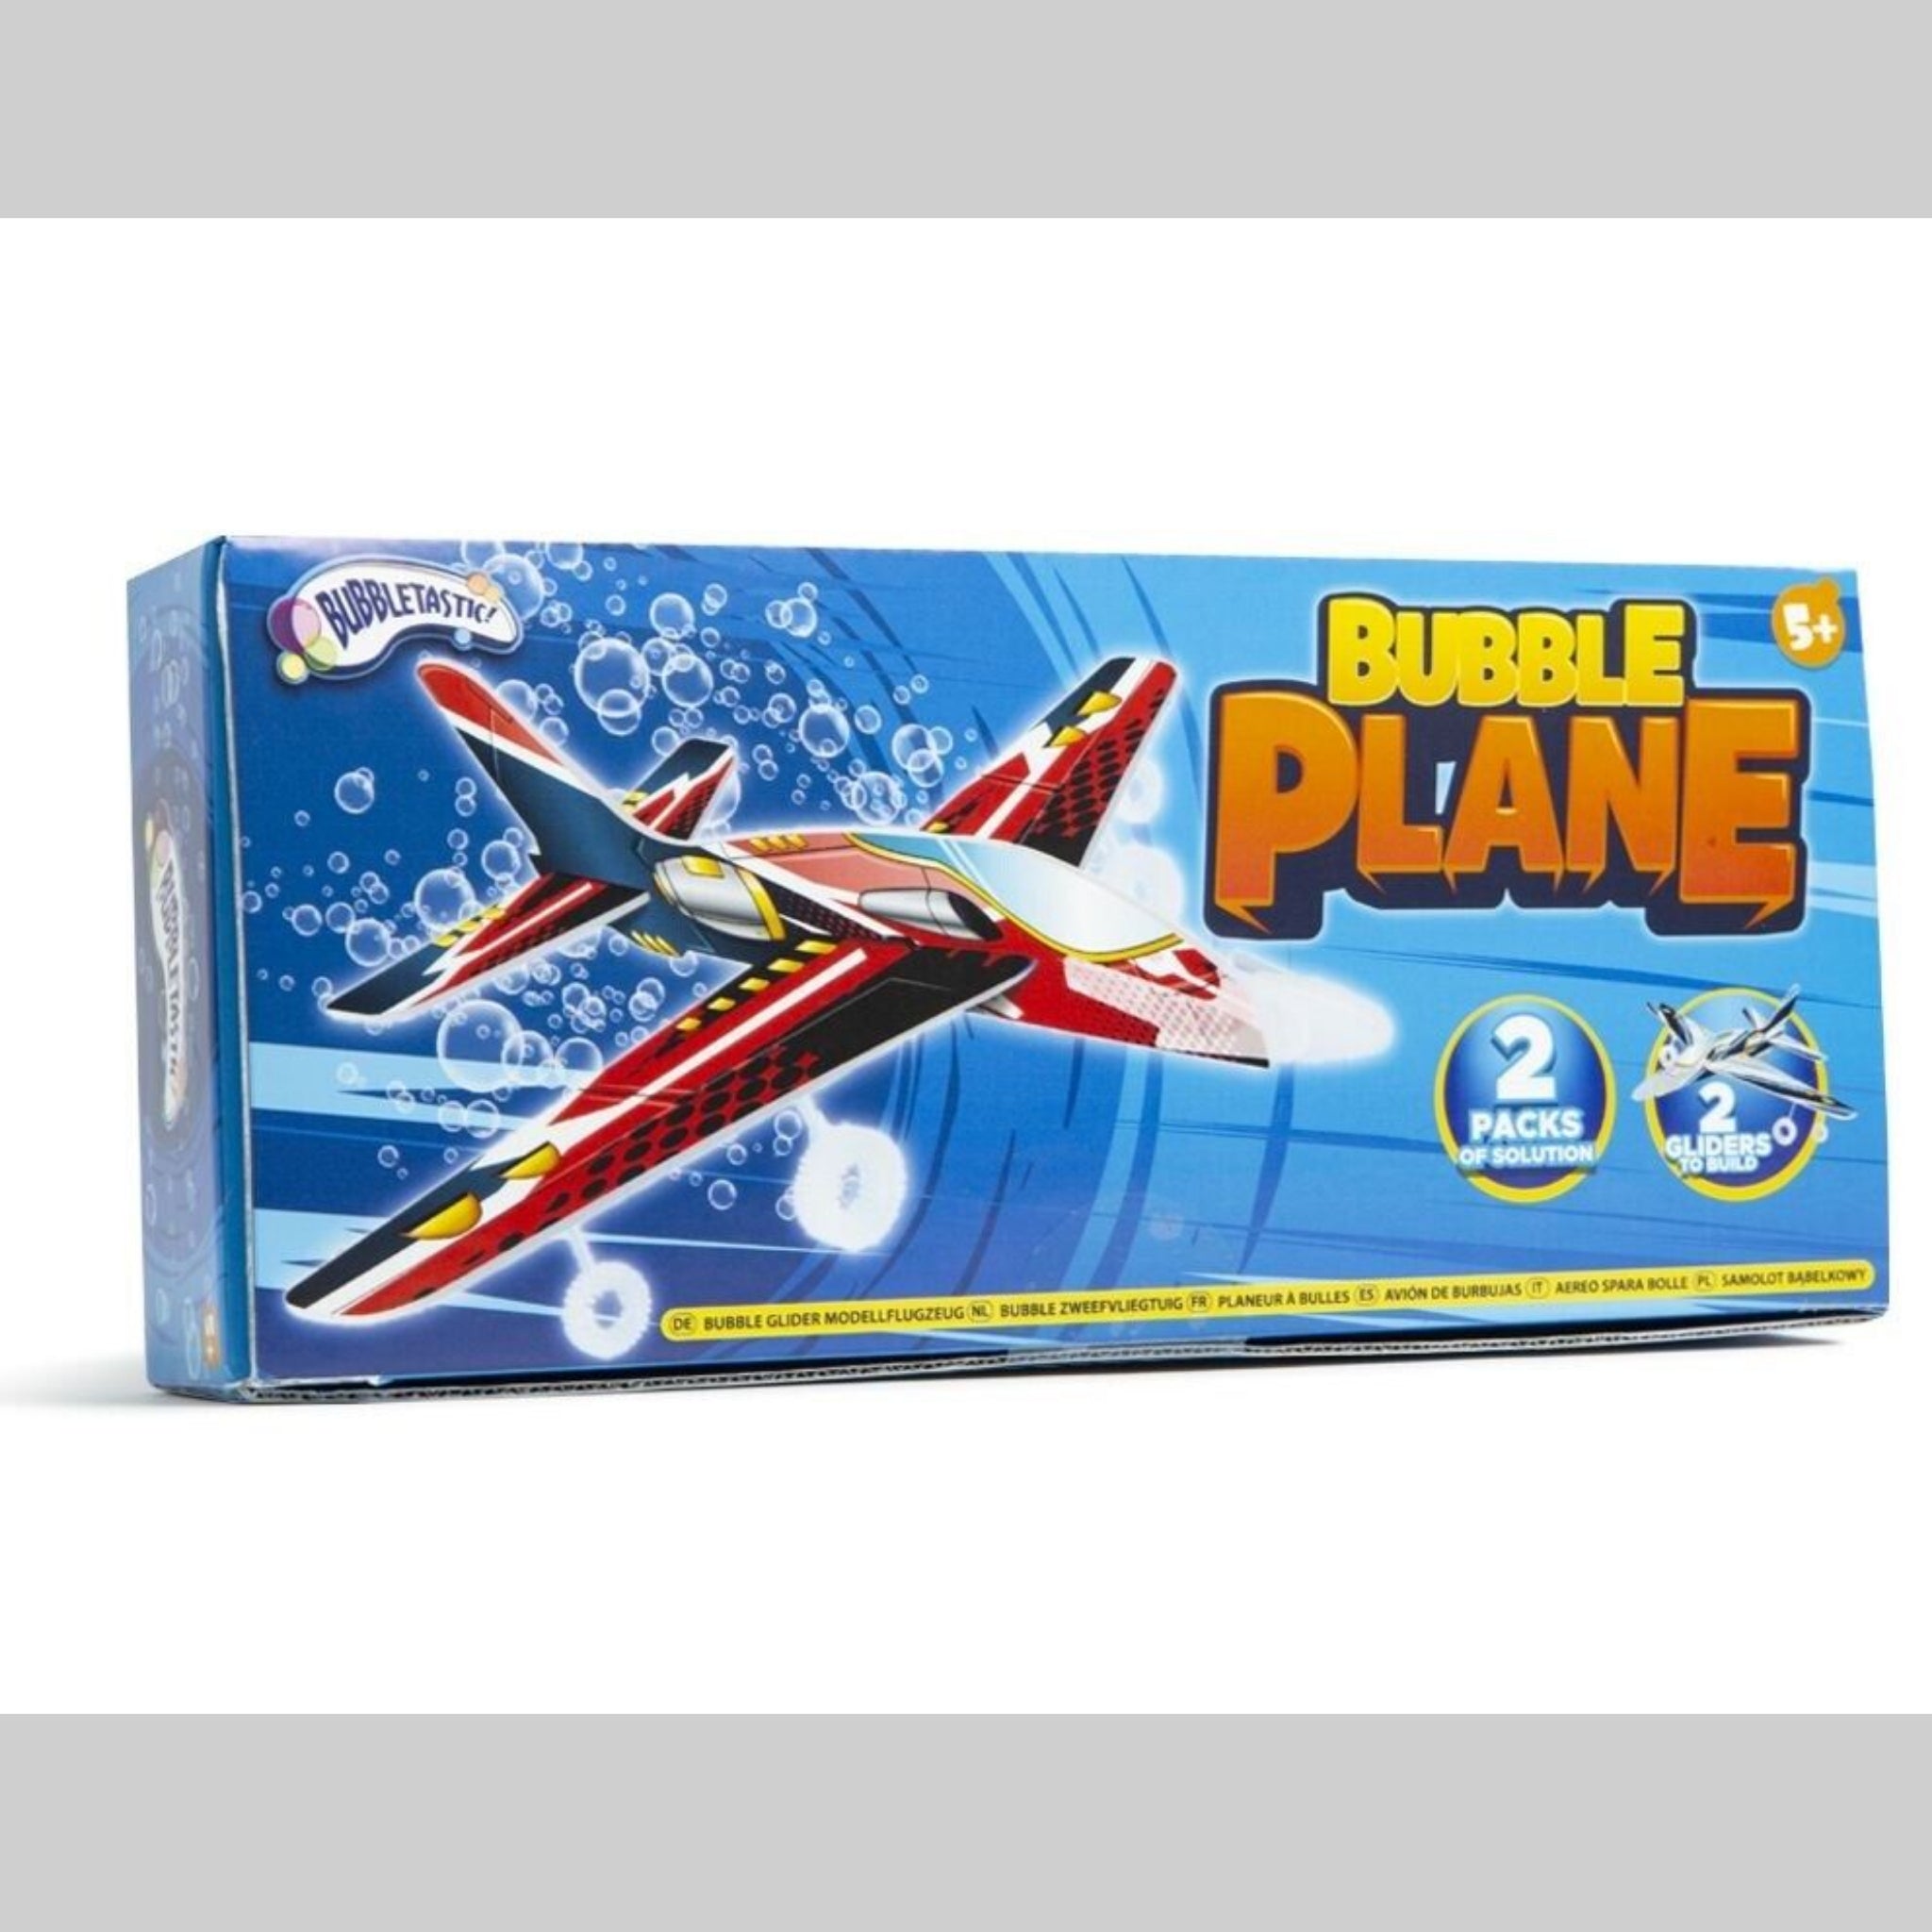 Beclen Harp 2 Bubble Plane Gliders Fun Toy With Solution For Endless Bubbles- Garden/Outdoor Party Essential For Christmas/Xmas